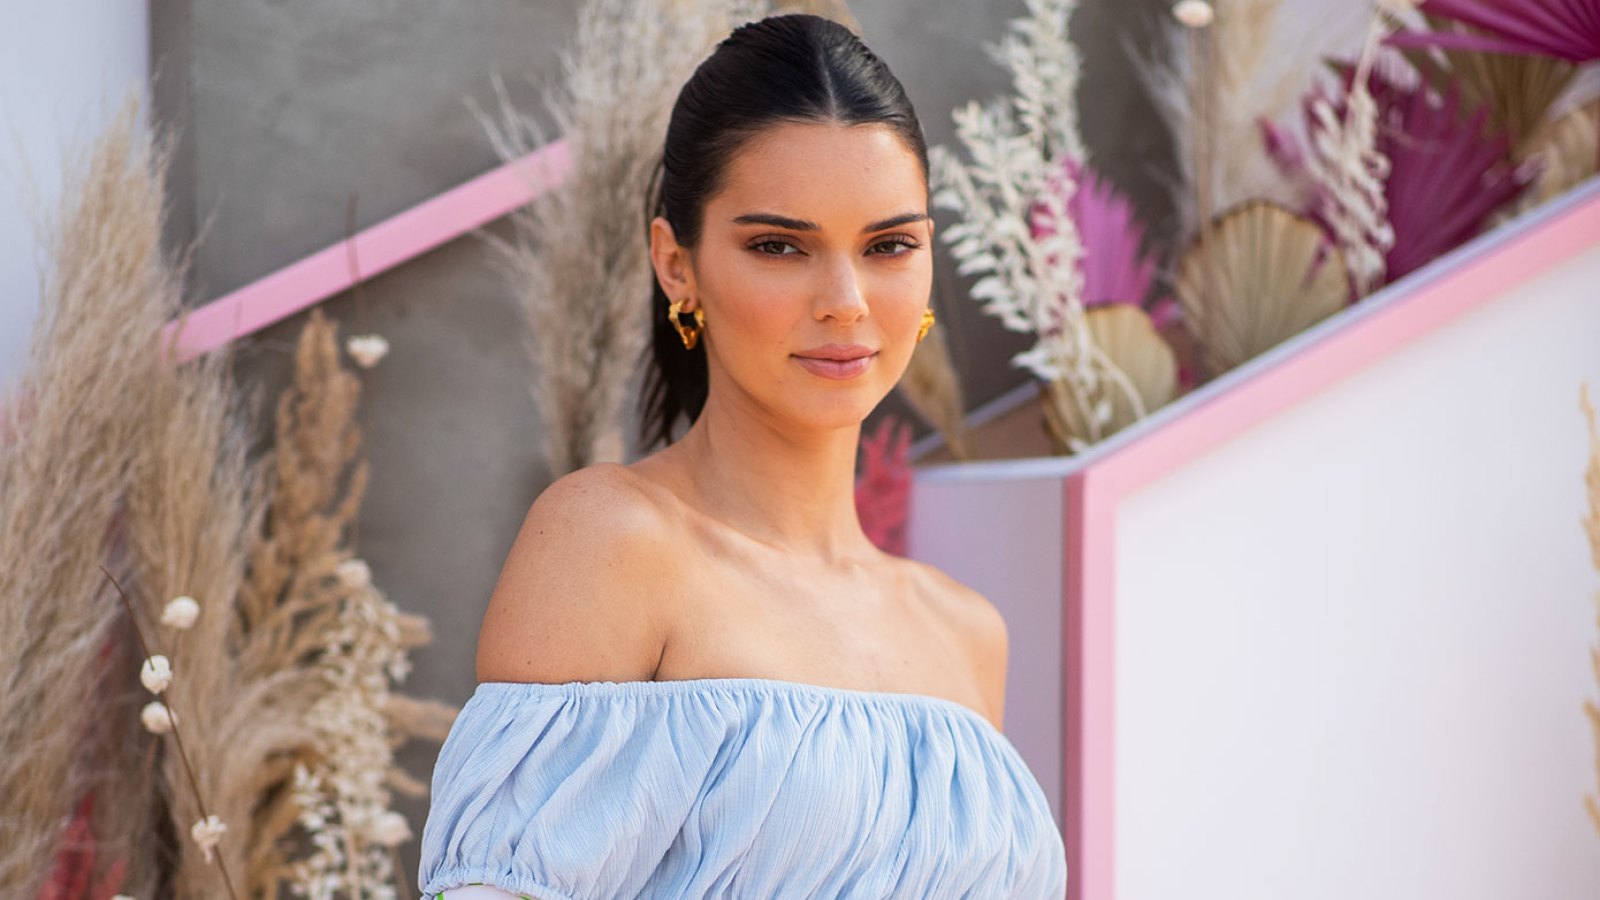 Kendall Jenner family photo pic Pregnancy Is in the Air